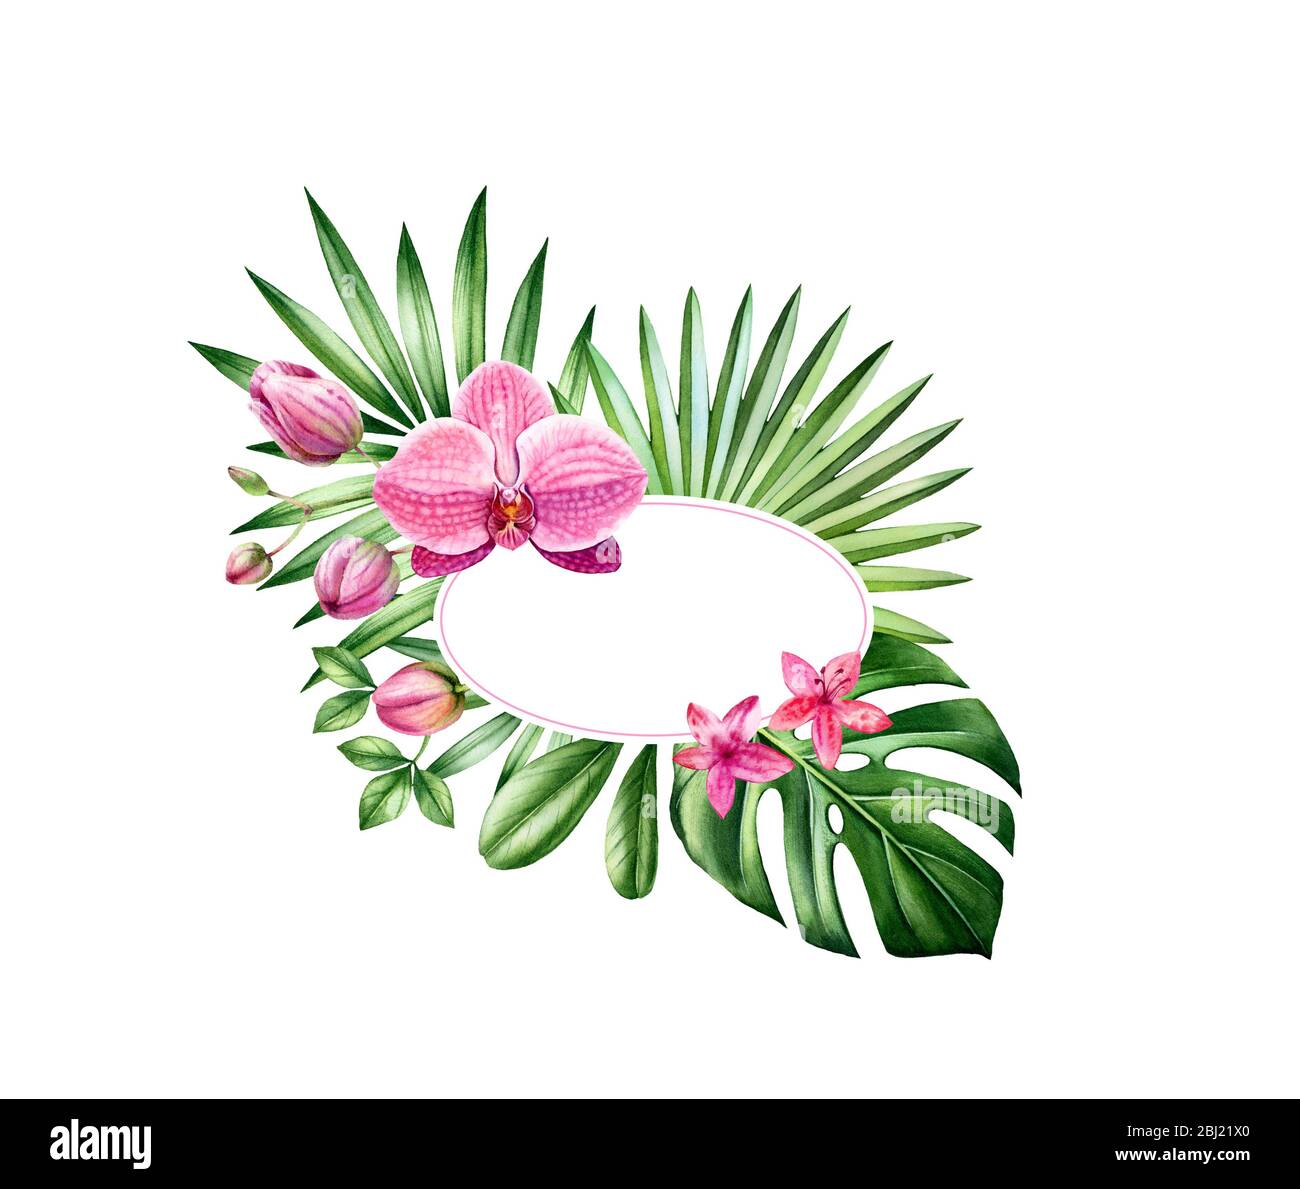 Watercolor floral banner. Oval frame with place for text. Big pink orchid flowers and palm leaves. Hand painted tropical background for logo and cards Stock Photo